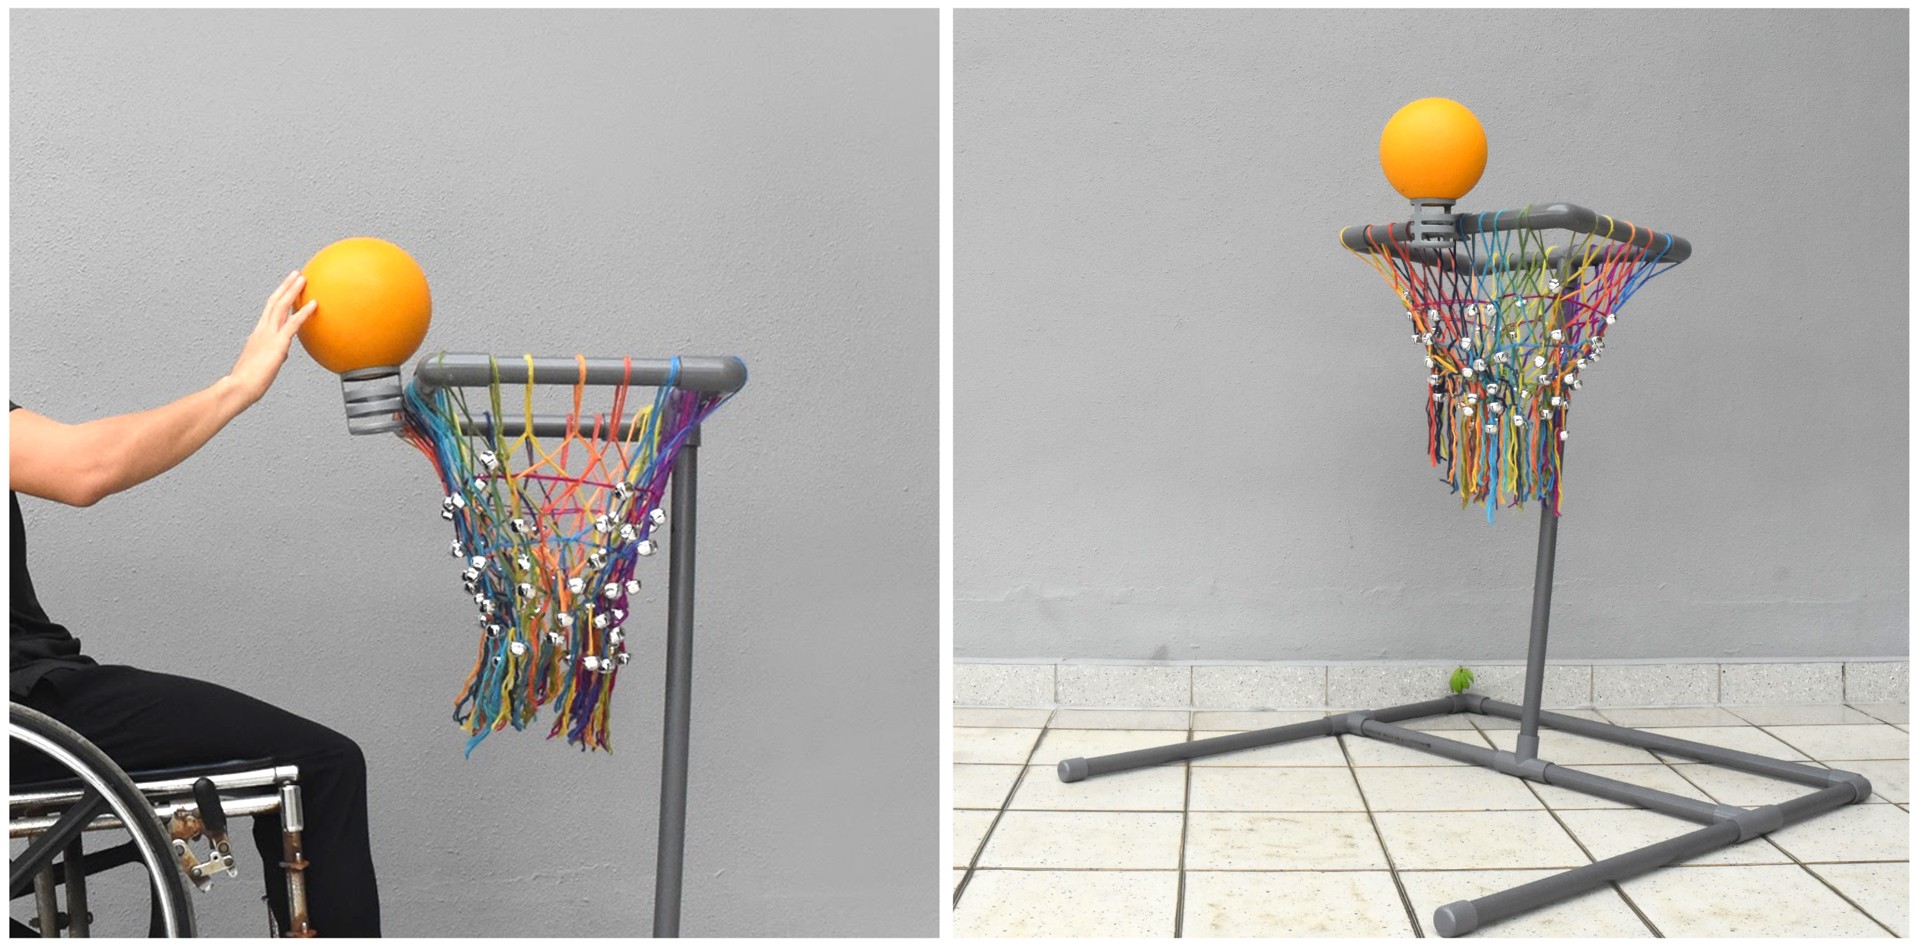 Figo assembled in basketball mode, which allows wheelchair users with multiple disabilities, such as cerebral palsy and hypotonia, to independently push a ball into the net.